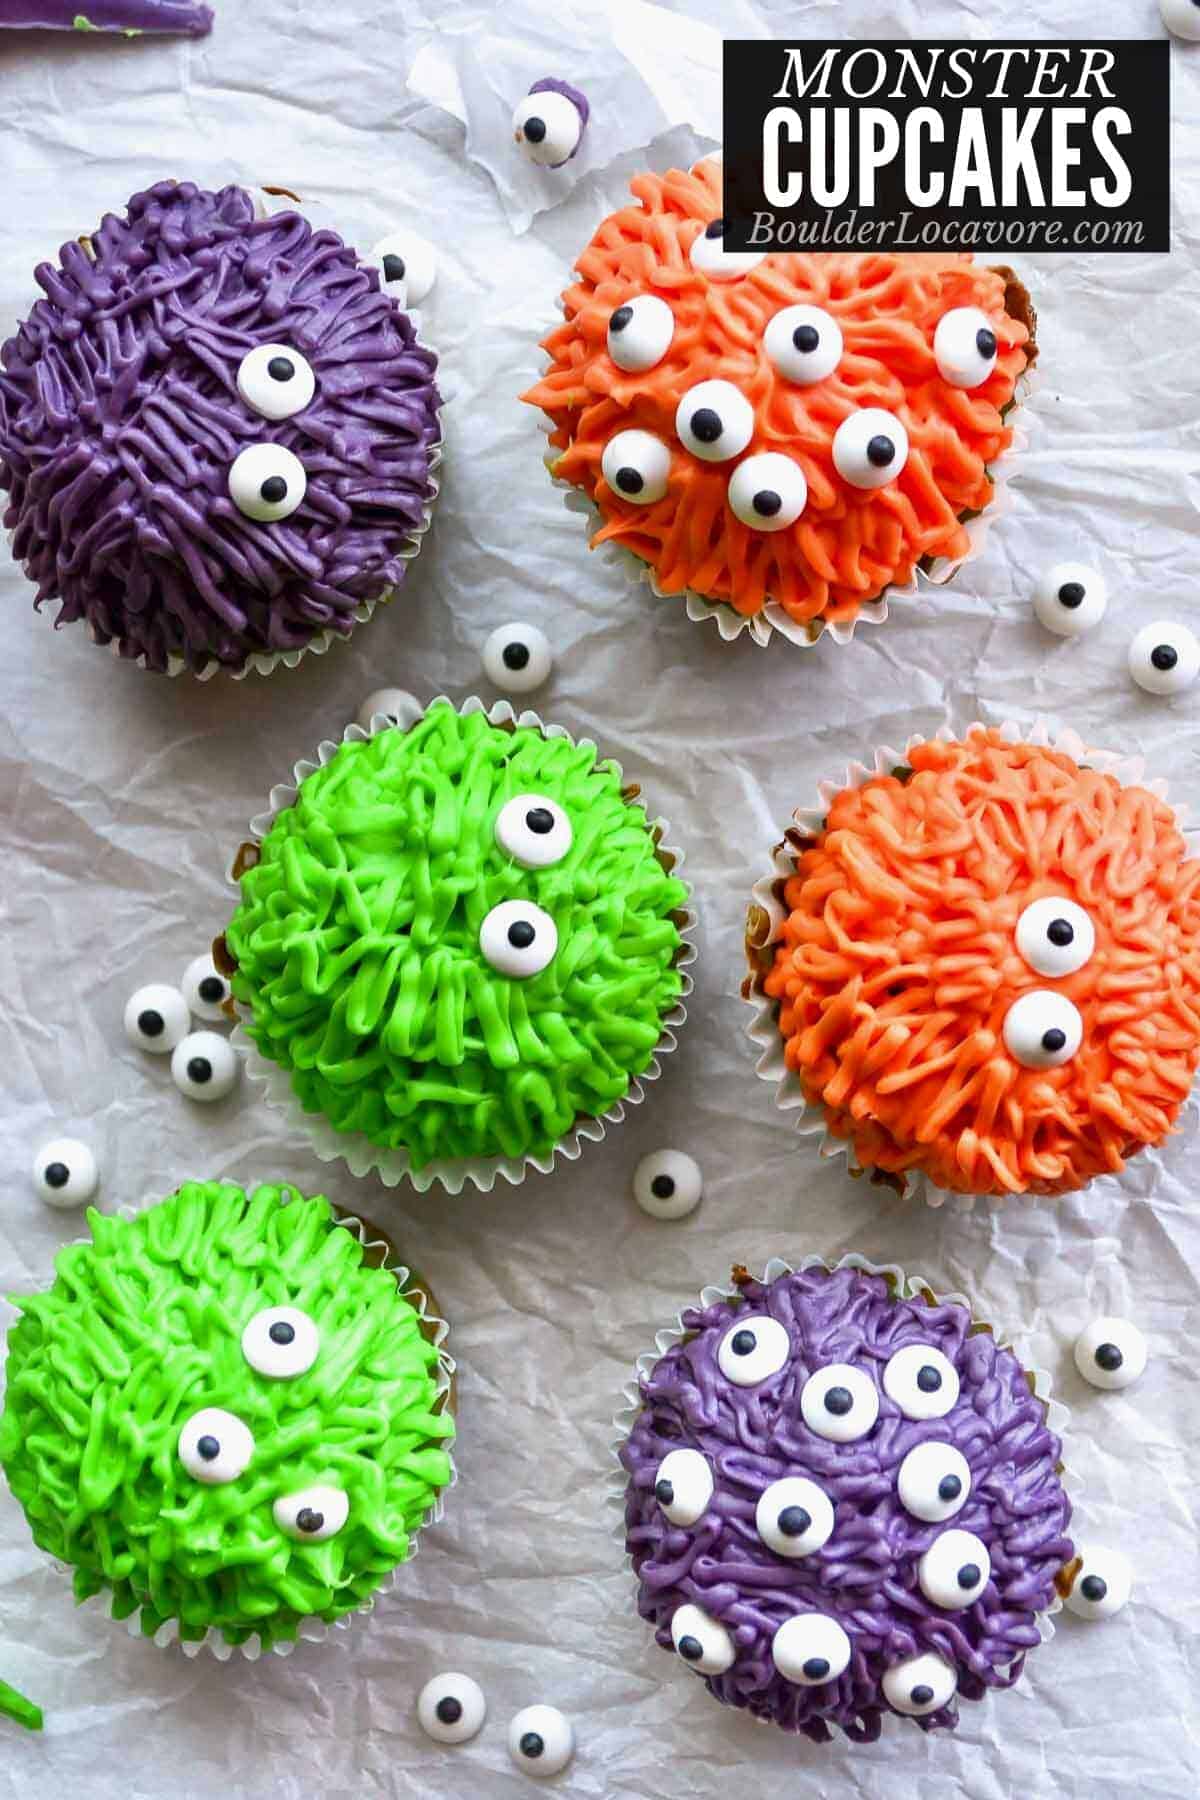 6 colorful monster cupcakes that are green, red and purple.